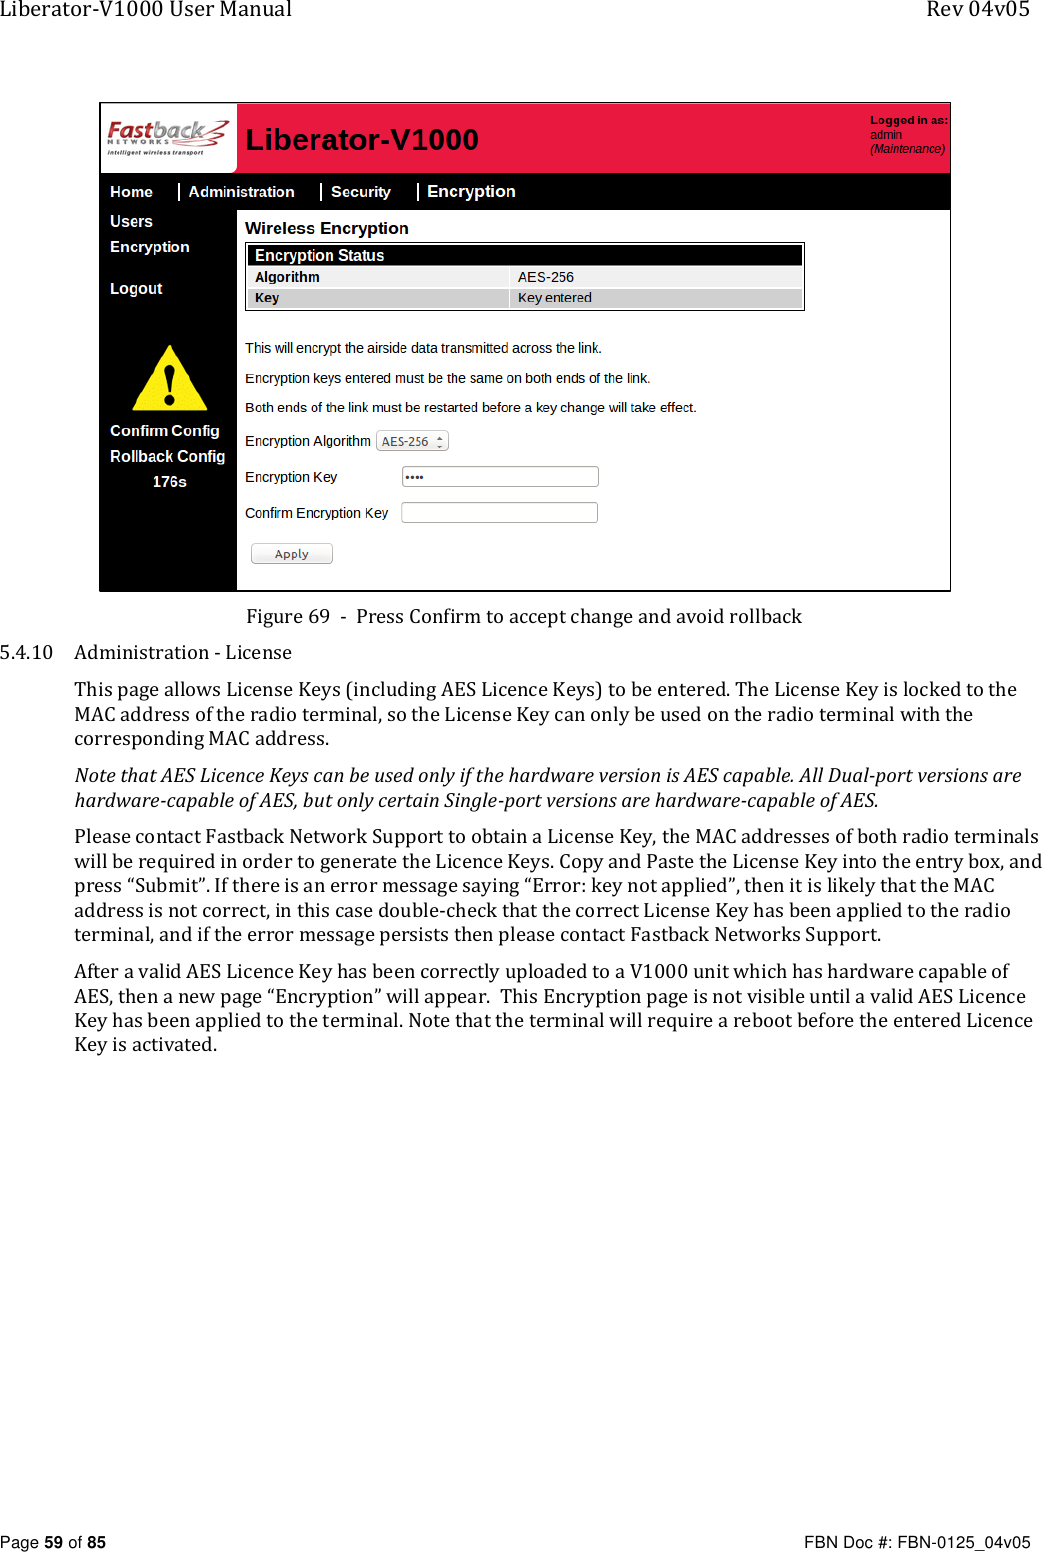 Liberator-V1000 User Manual  Rev 04v05     Page 59 of 85   FBN Doc #: FBN-0125_04v05  Figure 69  -  Press Confirm to accept change and avoid rollback 5.4.10 Administration - License This page allows License Keys (including AES Licence Keys) to be entered. The License Key is locked to the MAC address of the radio terminal, so the License Key can only be used on the radio terminal with the corresponding MAC address. Note that AES Licence Keys can be used only if the hardware version is AES capable. All Dual-port versions are hardware-capable of AES, but only certain Single-port versions are hardware-capable of AES. Please contact Fastback Network Support to obtain a License Key, the MAC addresses of both radio terminals will be required in order to generate the Licence Keys. Copy and Paste the License Key into the entry box, and press “Submit”. If there is an error message saying “Error: key not applied”, then it is likely that the MAC address is not correct, in this case double-check that the correct License Key has been applied to the radio terminal, and if the error message persists then please contact Fastback Networks Support. After a valid AES Licence Key has been correctly uploaded to a V1000 unit which has hardware capable of AES, then a new page “Encryption” will appear.  This Encryption page is not visible until a valid AES Licence Key has been applied to the terminal. Note that the terminal will require a reboot before the entered Licence Key is activated.  